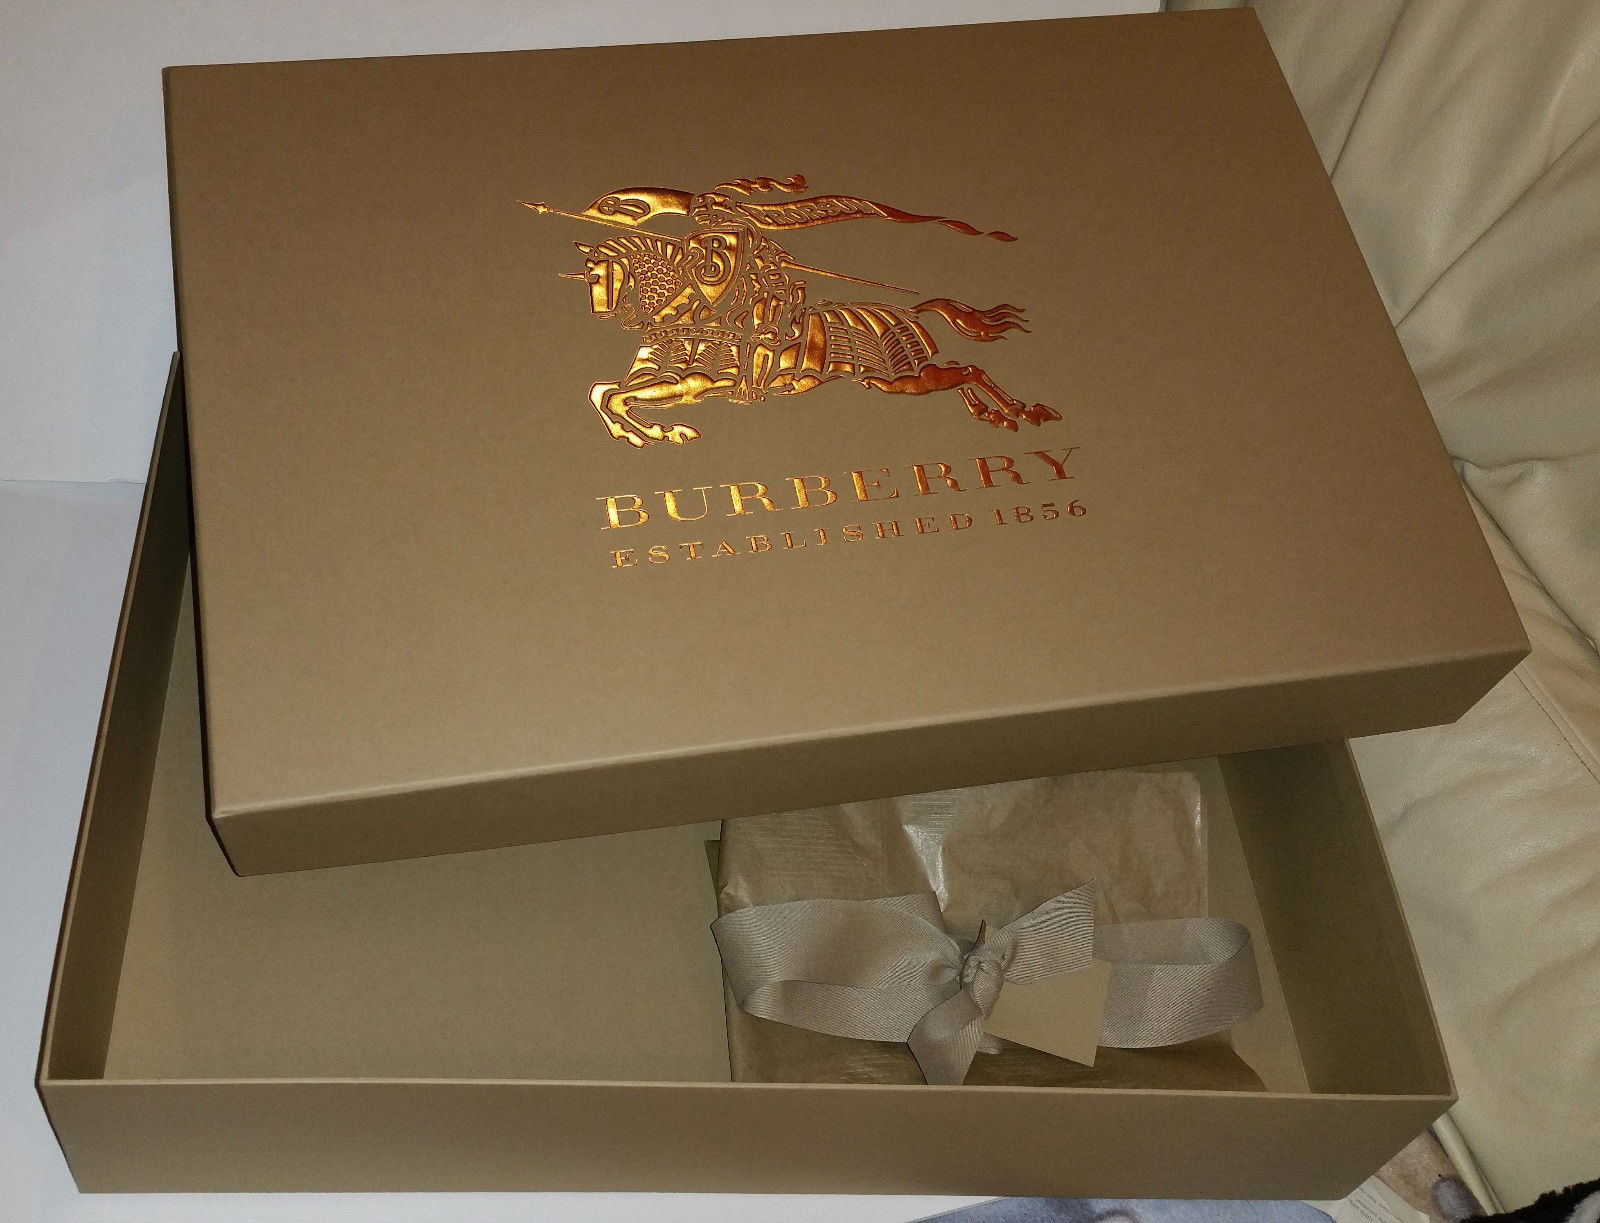 Burberry Large Two Gift Boxes Sturdy Includes Top and Lid Ribbon Tissue Paper - Gift Boxes